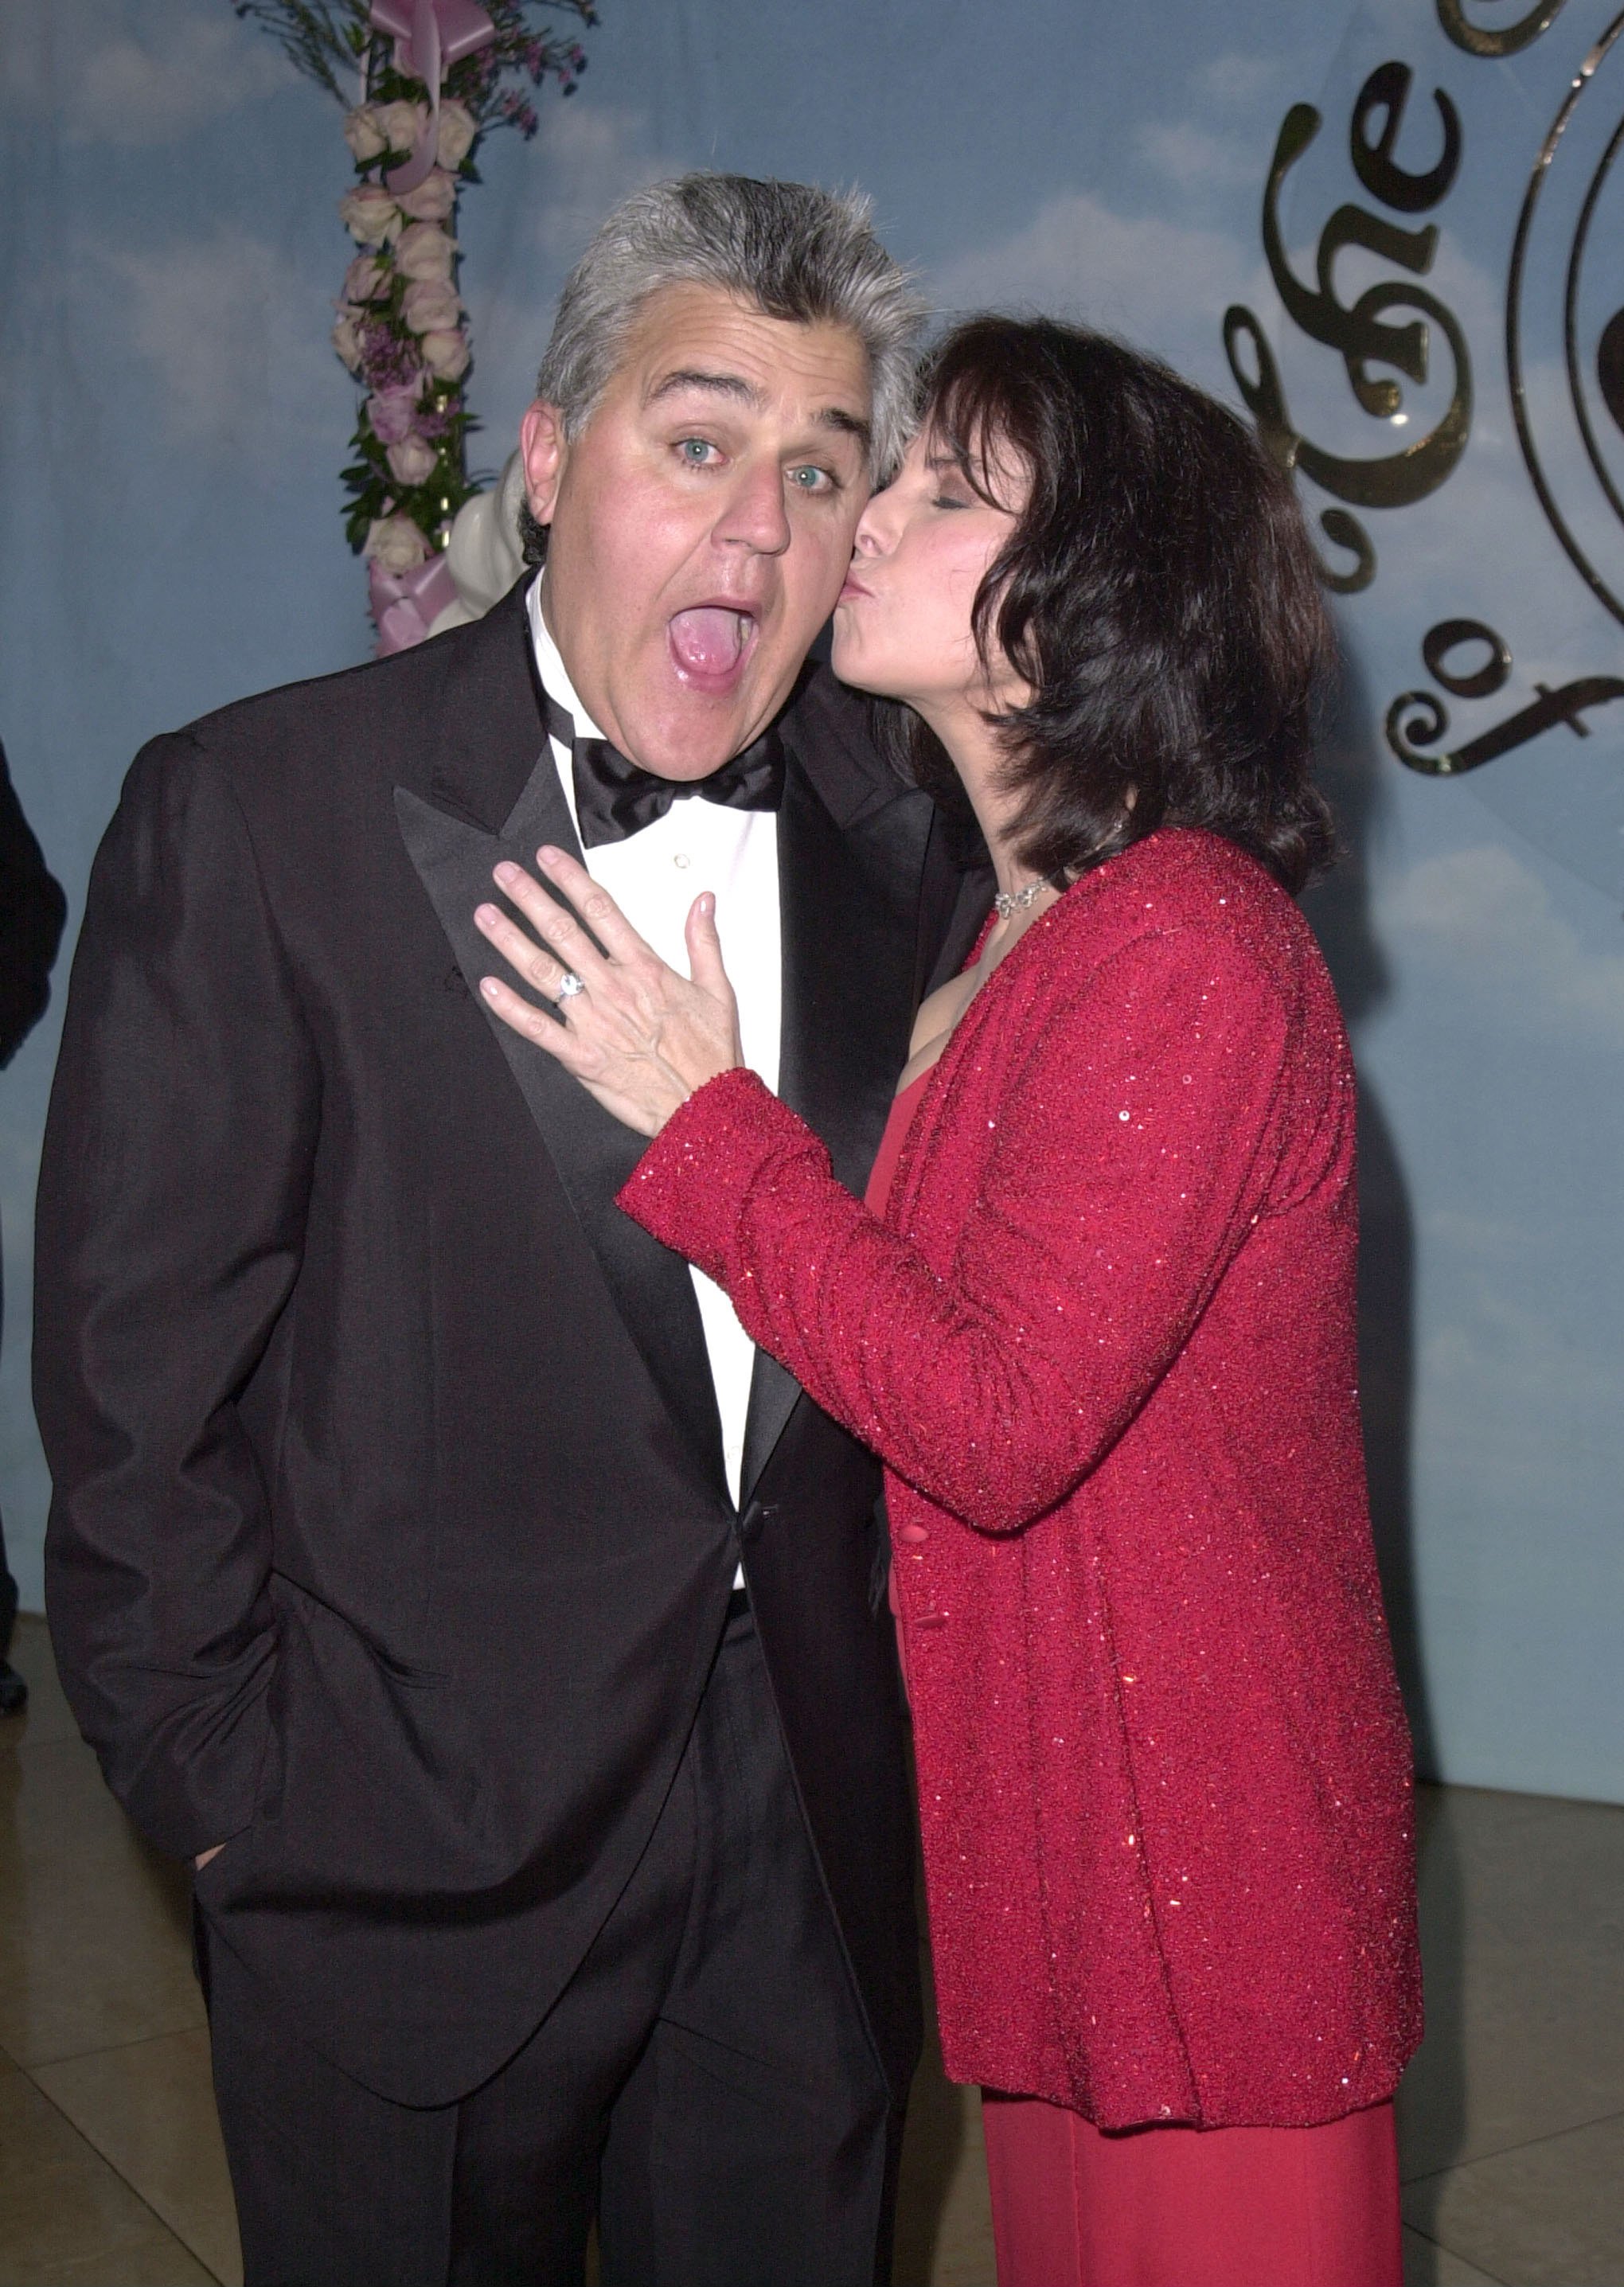 Mavis Leno kisses her husband Jay Leno's cheek during the 14th Carousel of Hope Ball for Barbara Davis Center for Diabetes at Beverly Hills Hilton Hotel in Beverly Hills, California. | Source: Getty Images